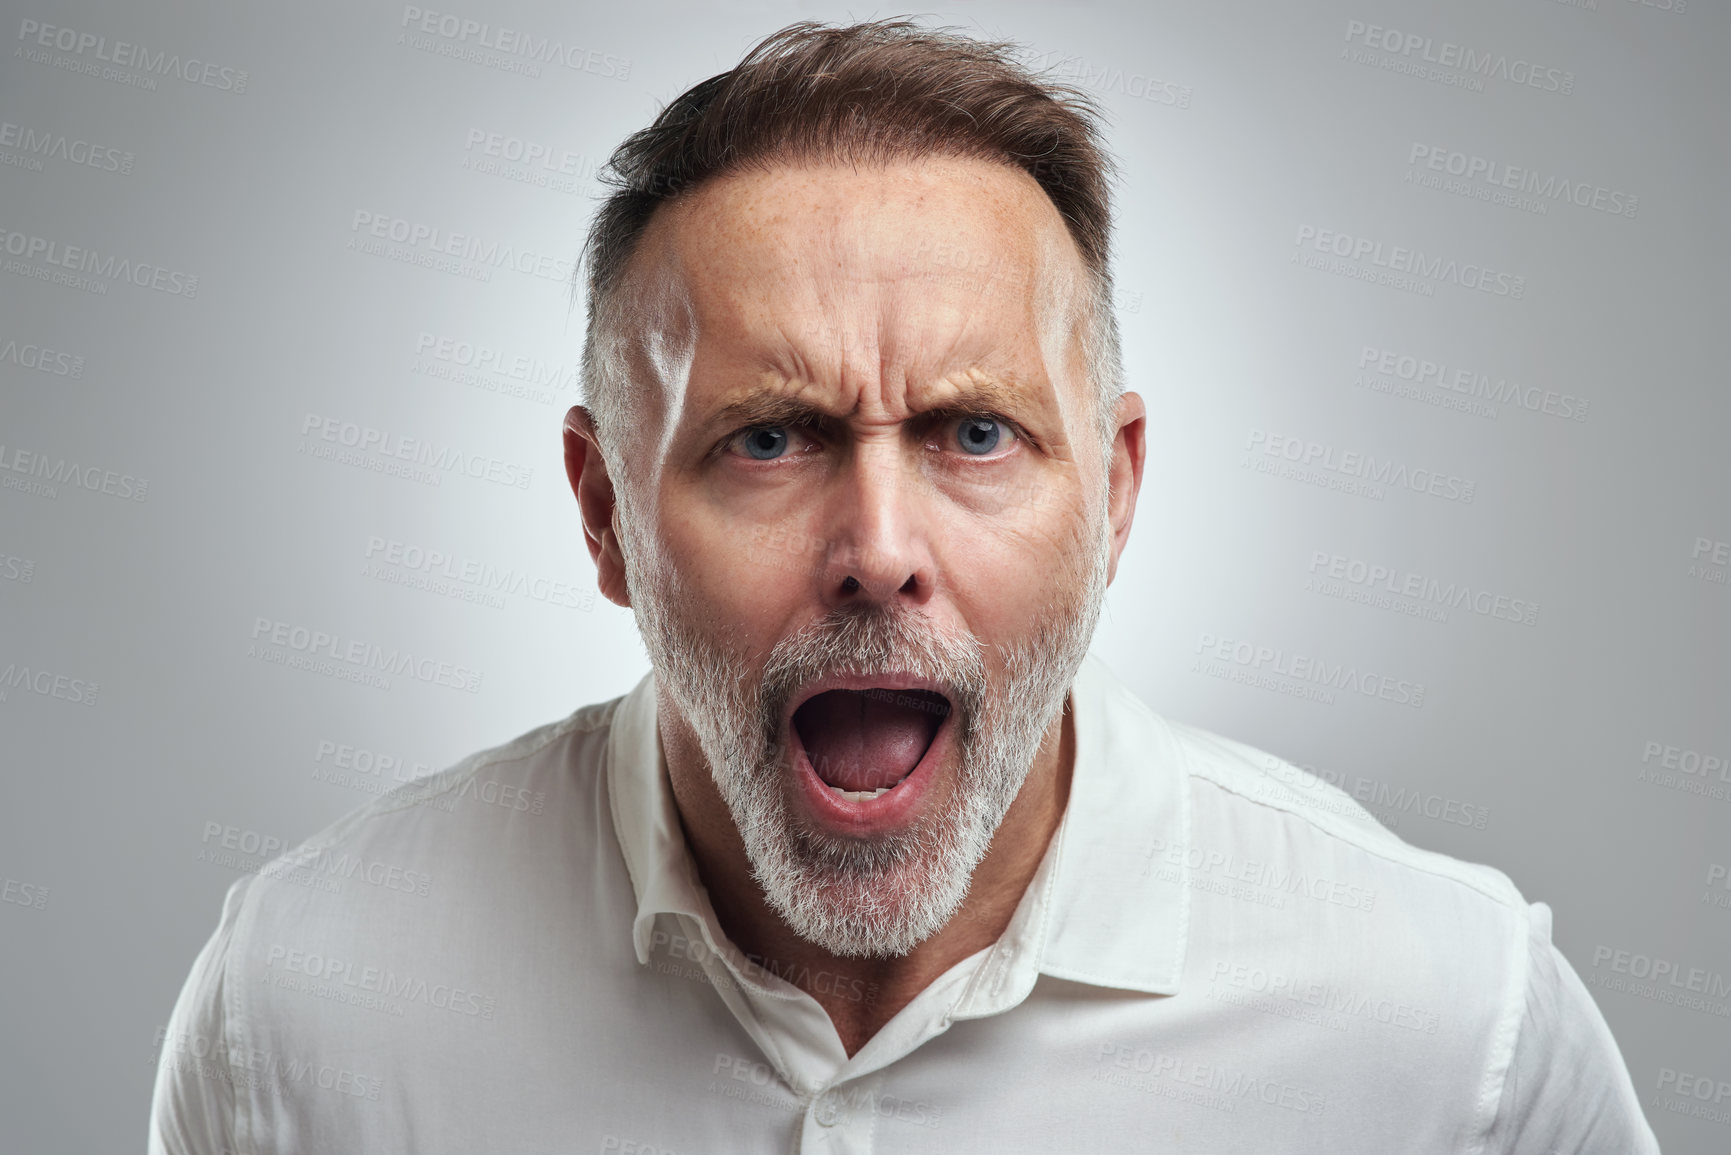 Buy stock photo Studio portrait of a mature man yelling against a grey background